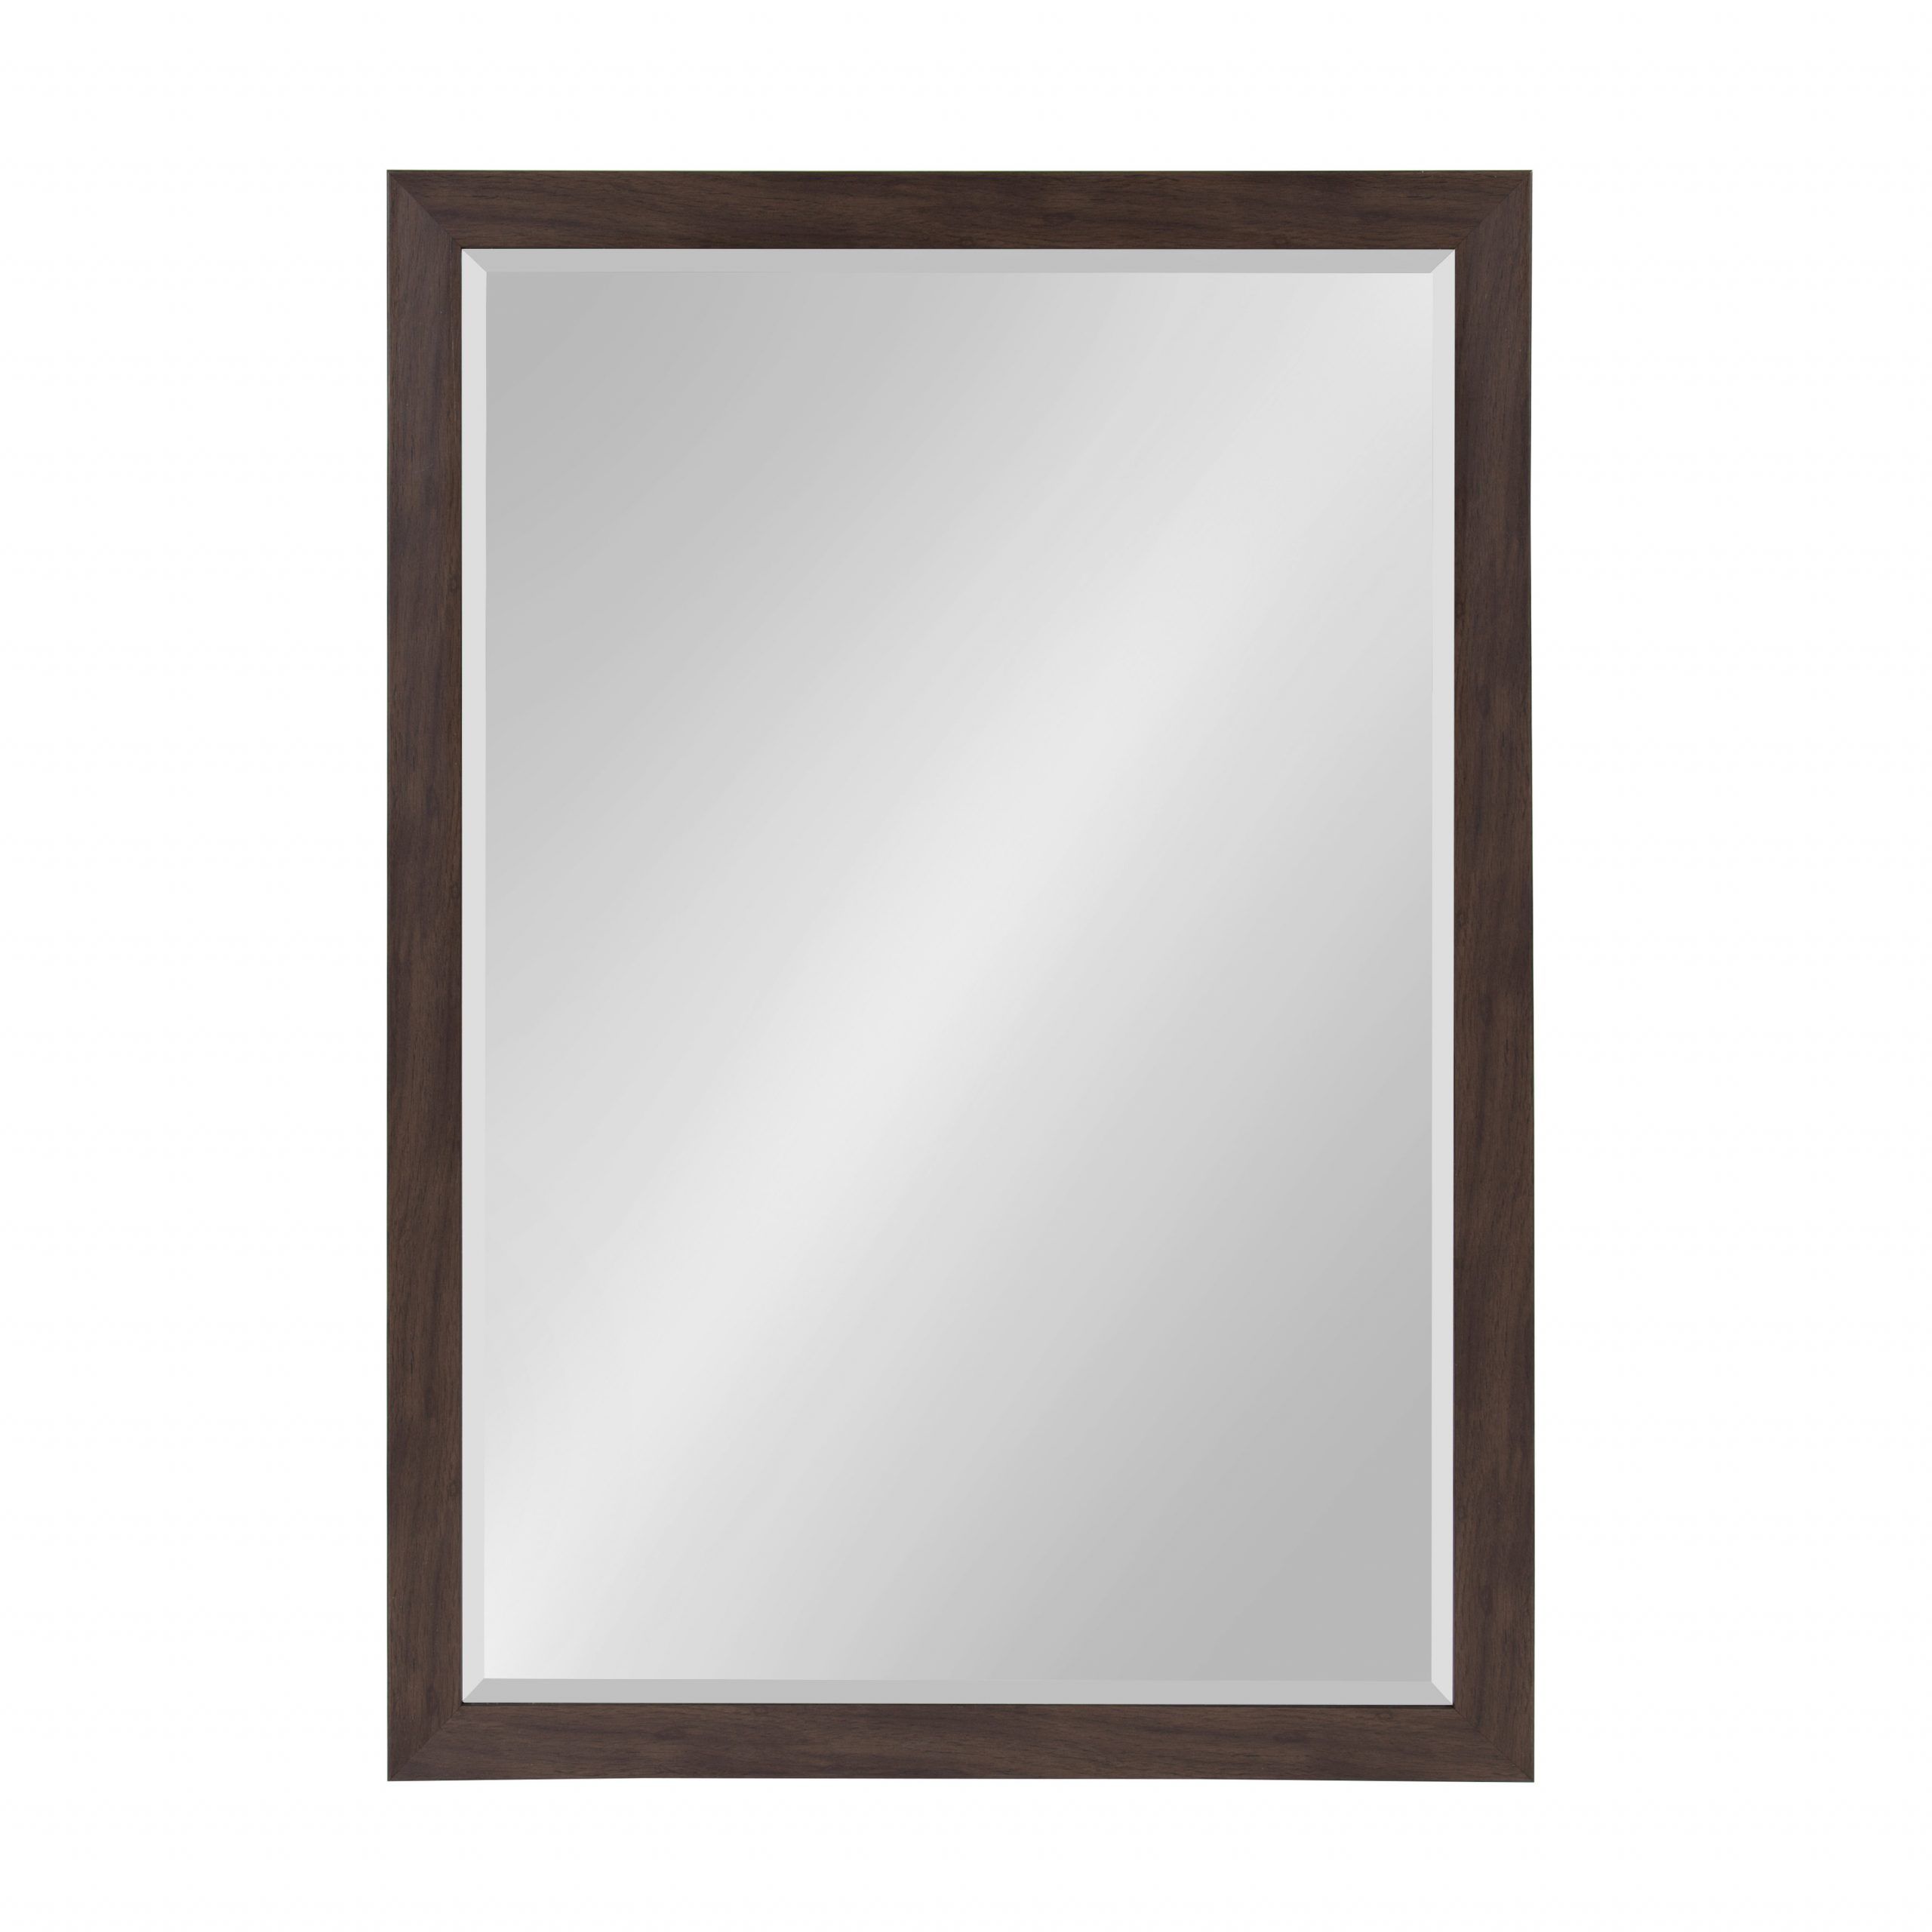 Designovation – Beatrice Framed Decorative Rectangle Wall Mirror, 27 X With Rectangular Chevron Edge Wall Mirrors (View 1 of 15)